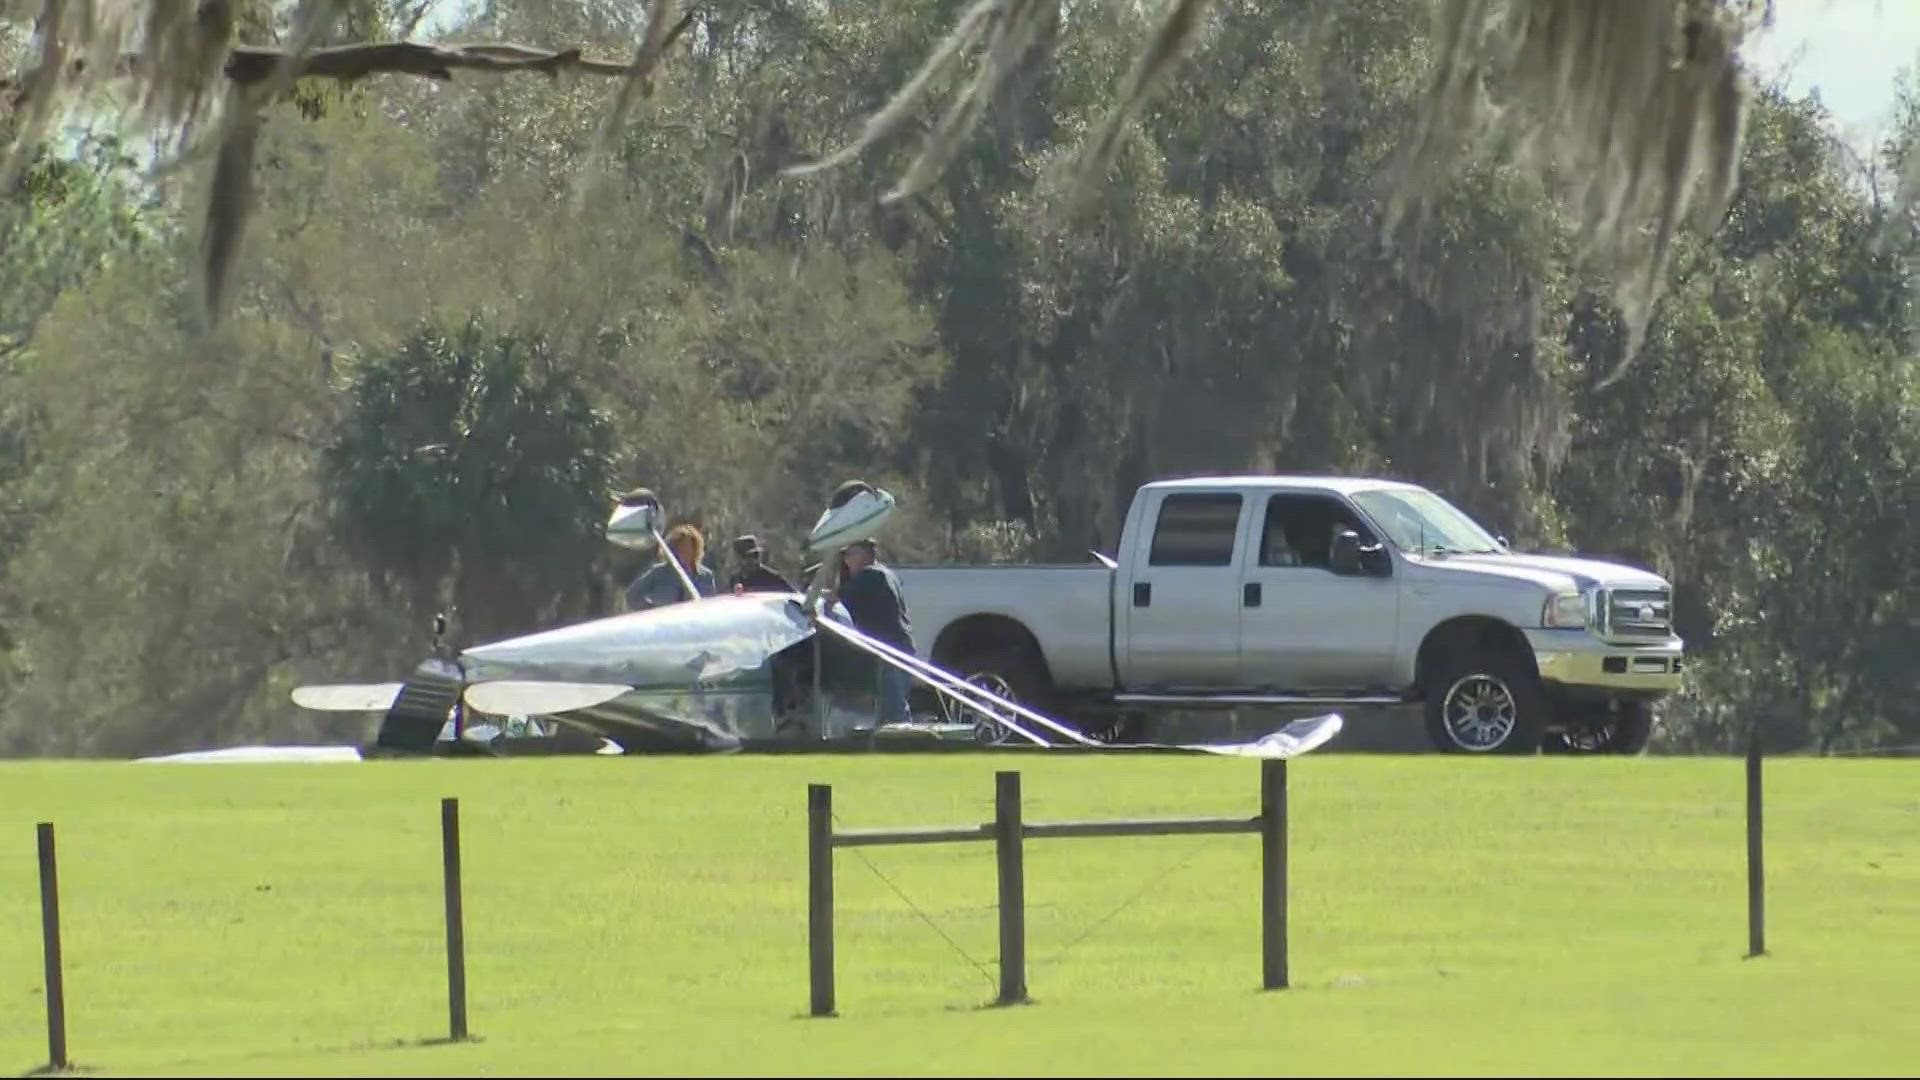 A report from Florida Highway Patrol says the pilot thought his GPS was telling him to land in the field.